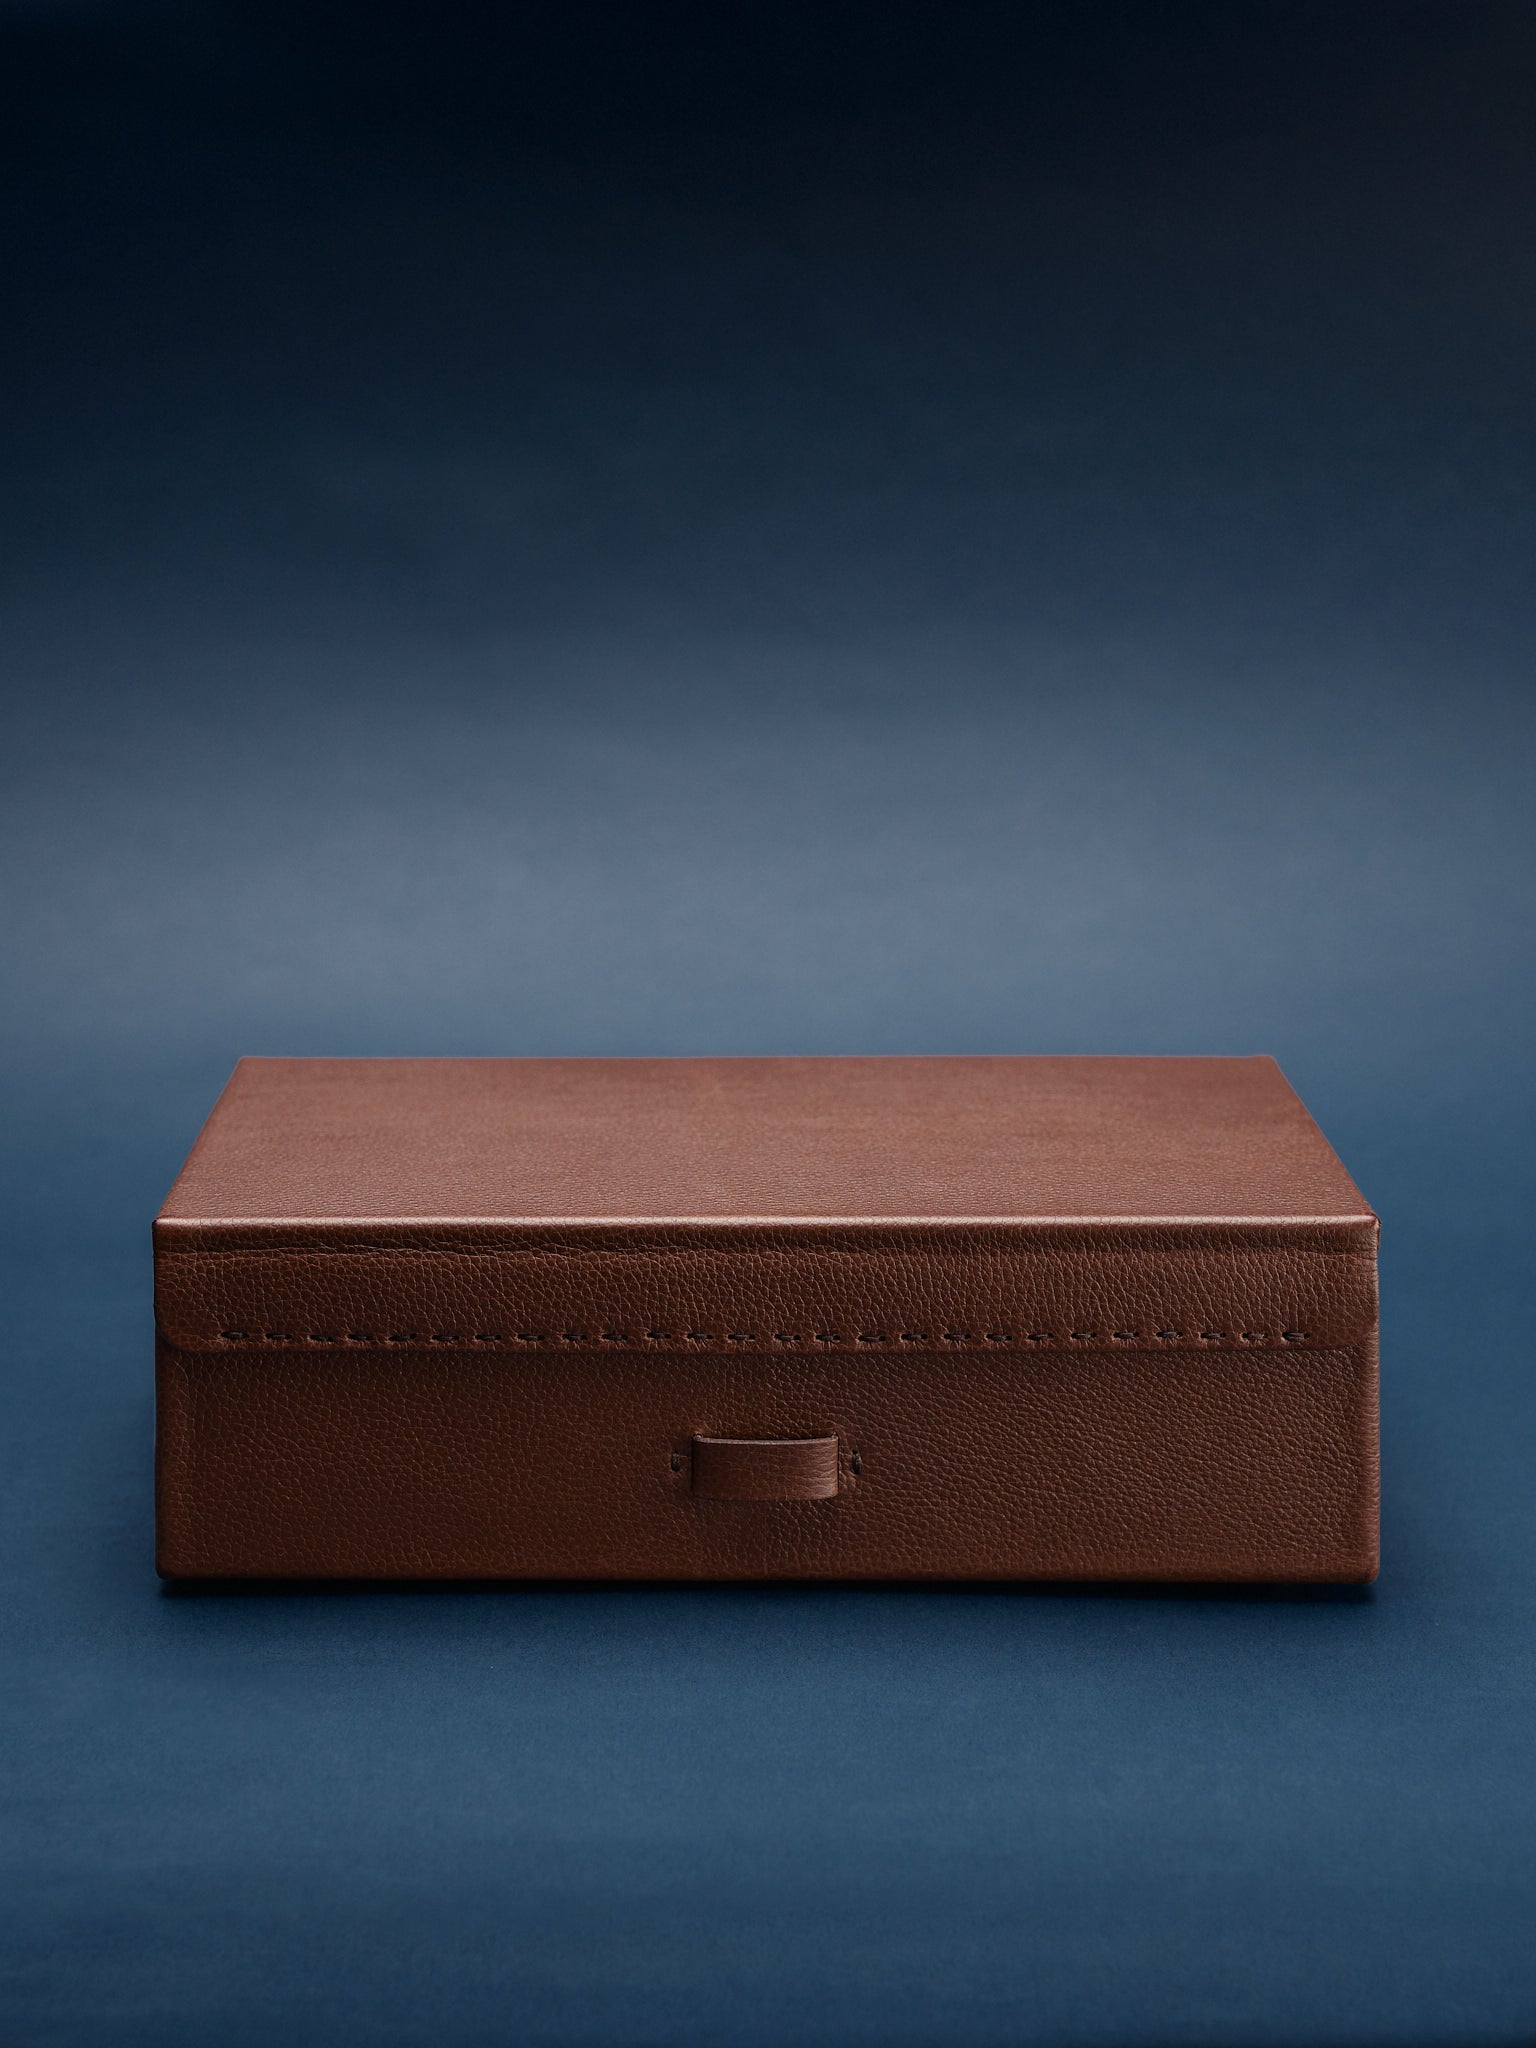 Hand-stitched Lid. Best Watch Box Brown by Capra Leather